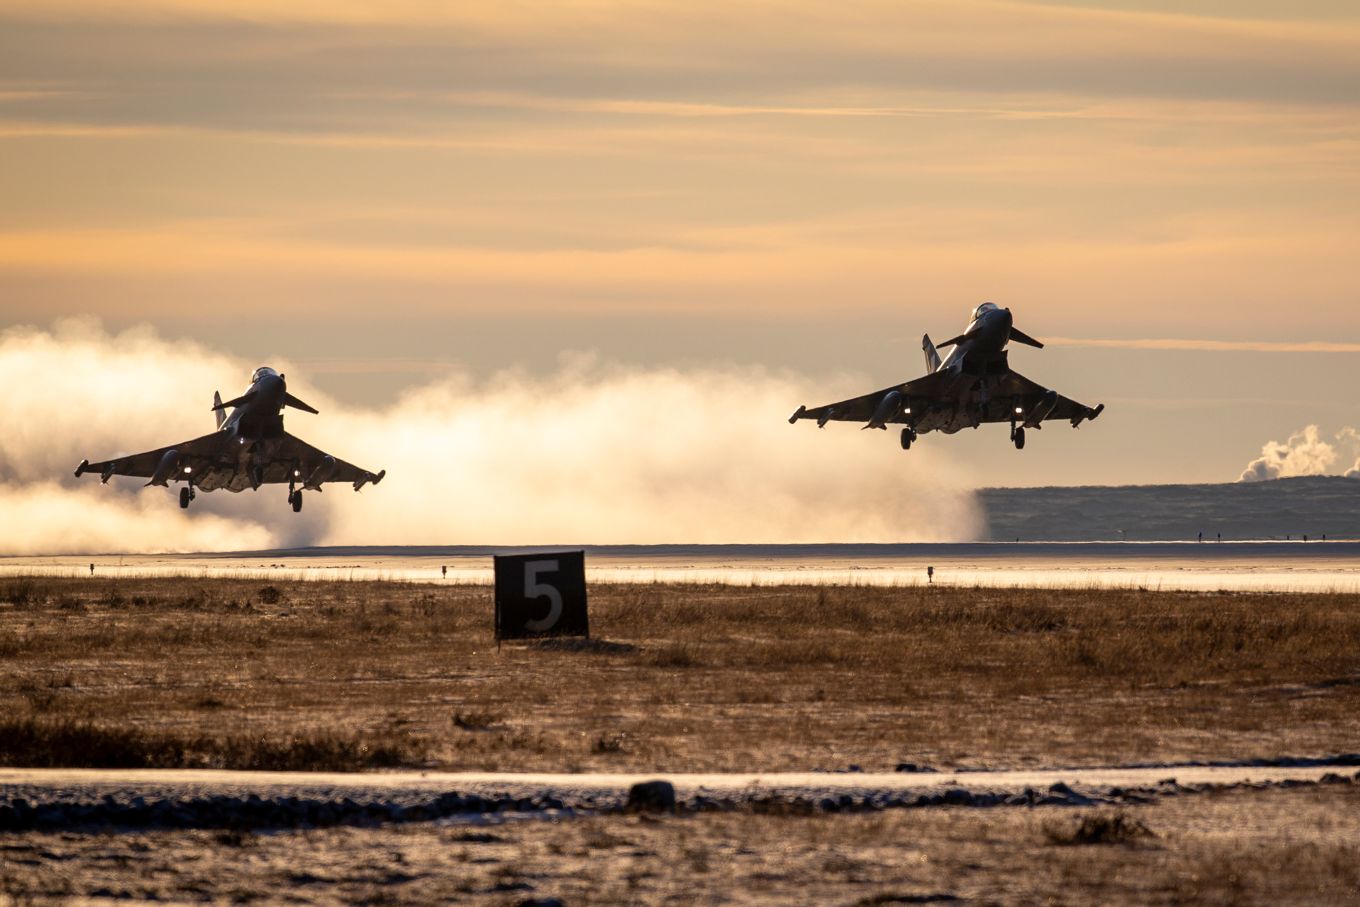 Two 1(F) Squadron Eurofighter Typhoon FGR4s take-off from Keflavik Air Base as part of the NATO Icelandic Air Policing mission